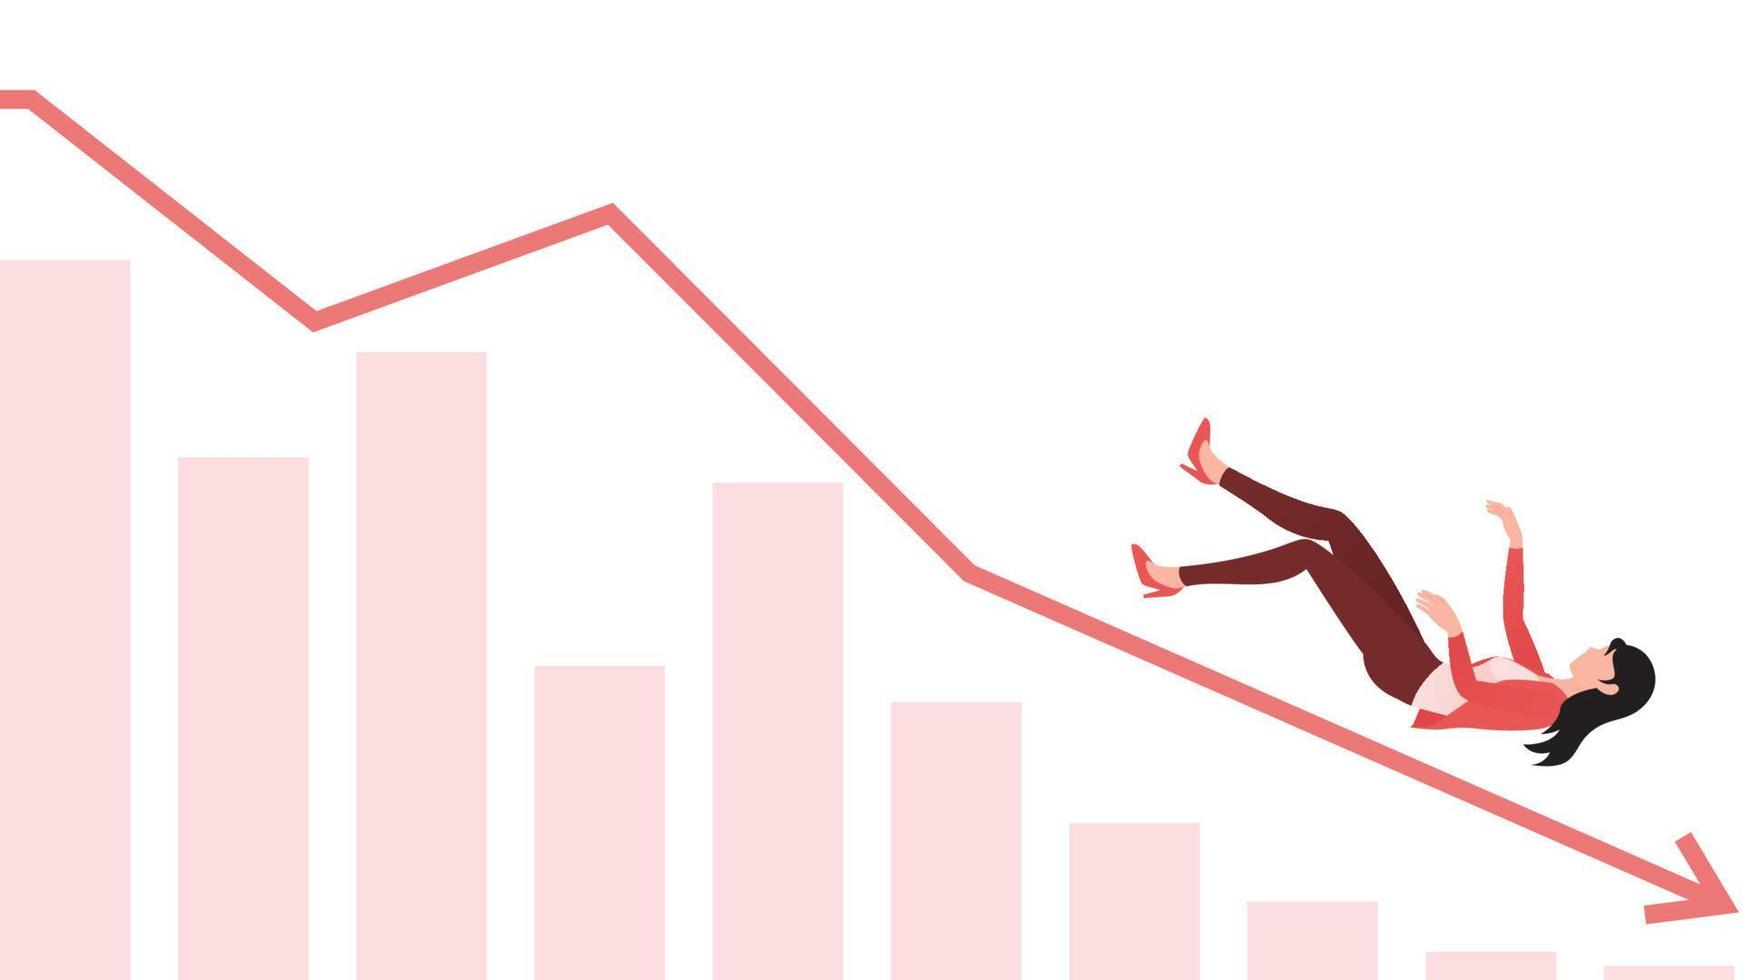 woman falling from graph, business character vector illustration on white background.